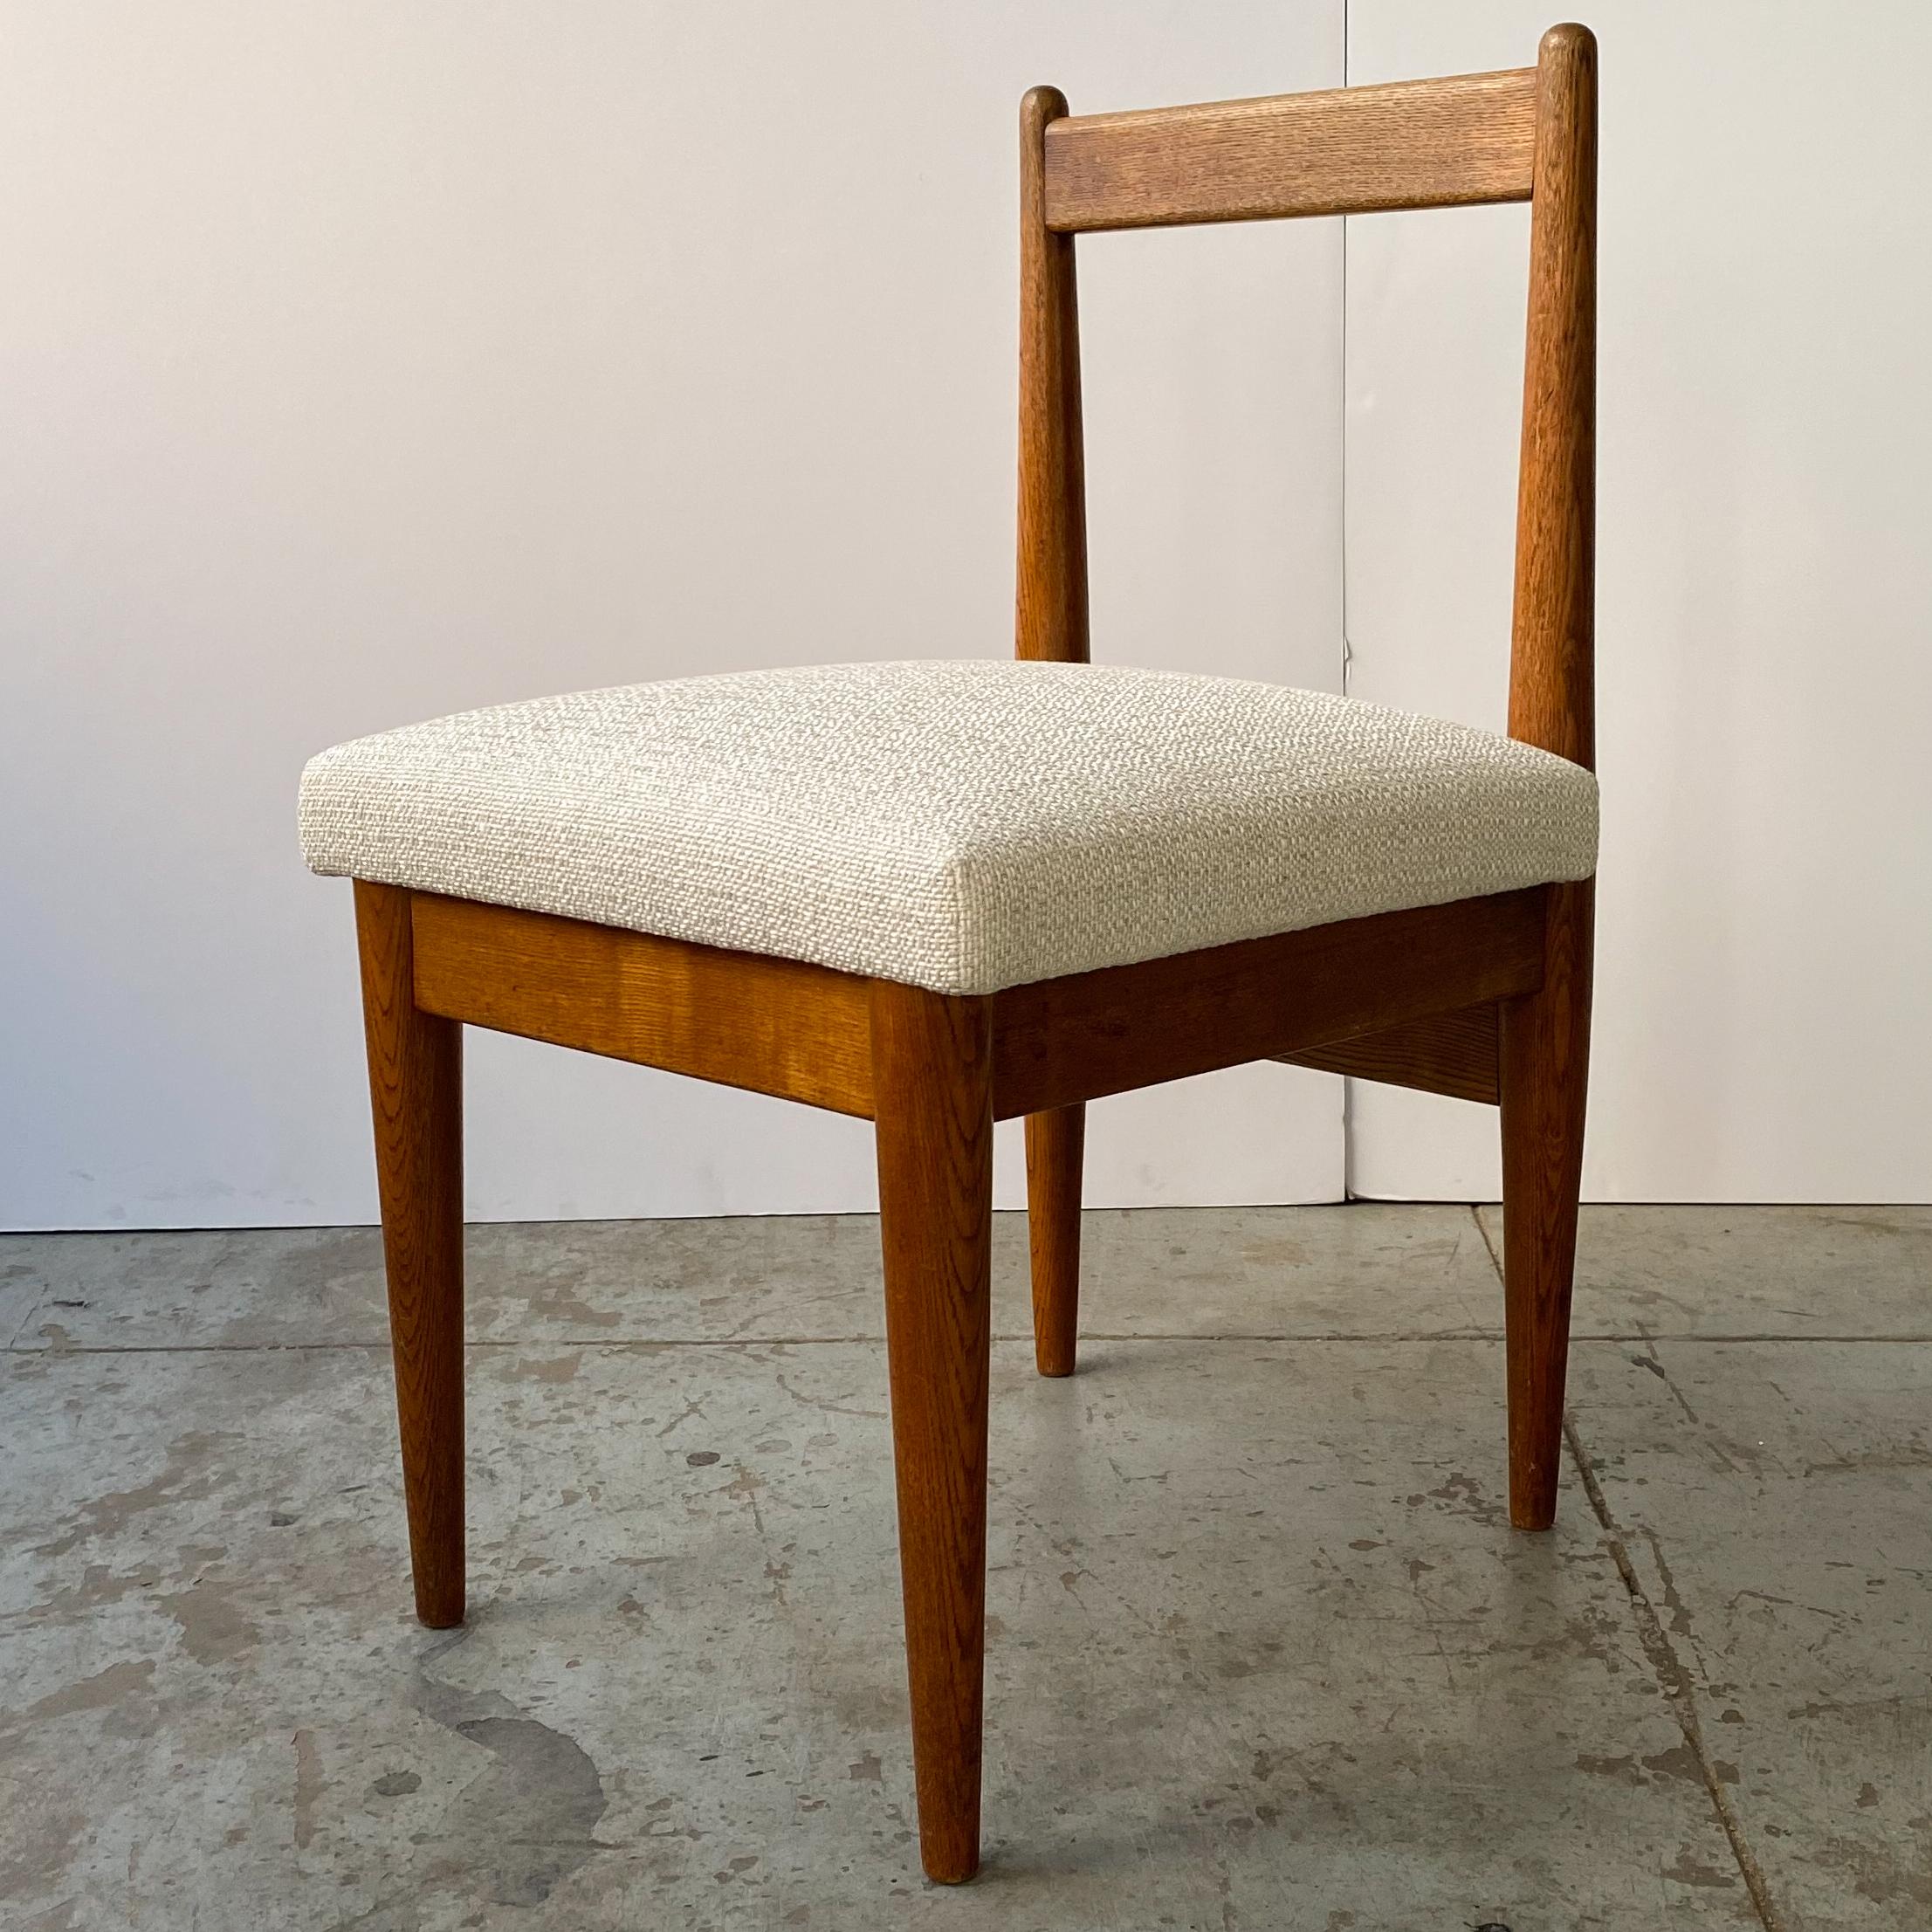 Japanese Set of Four Chairs by Katsuo Matsumura